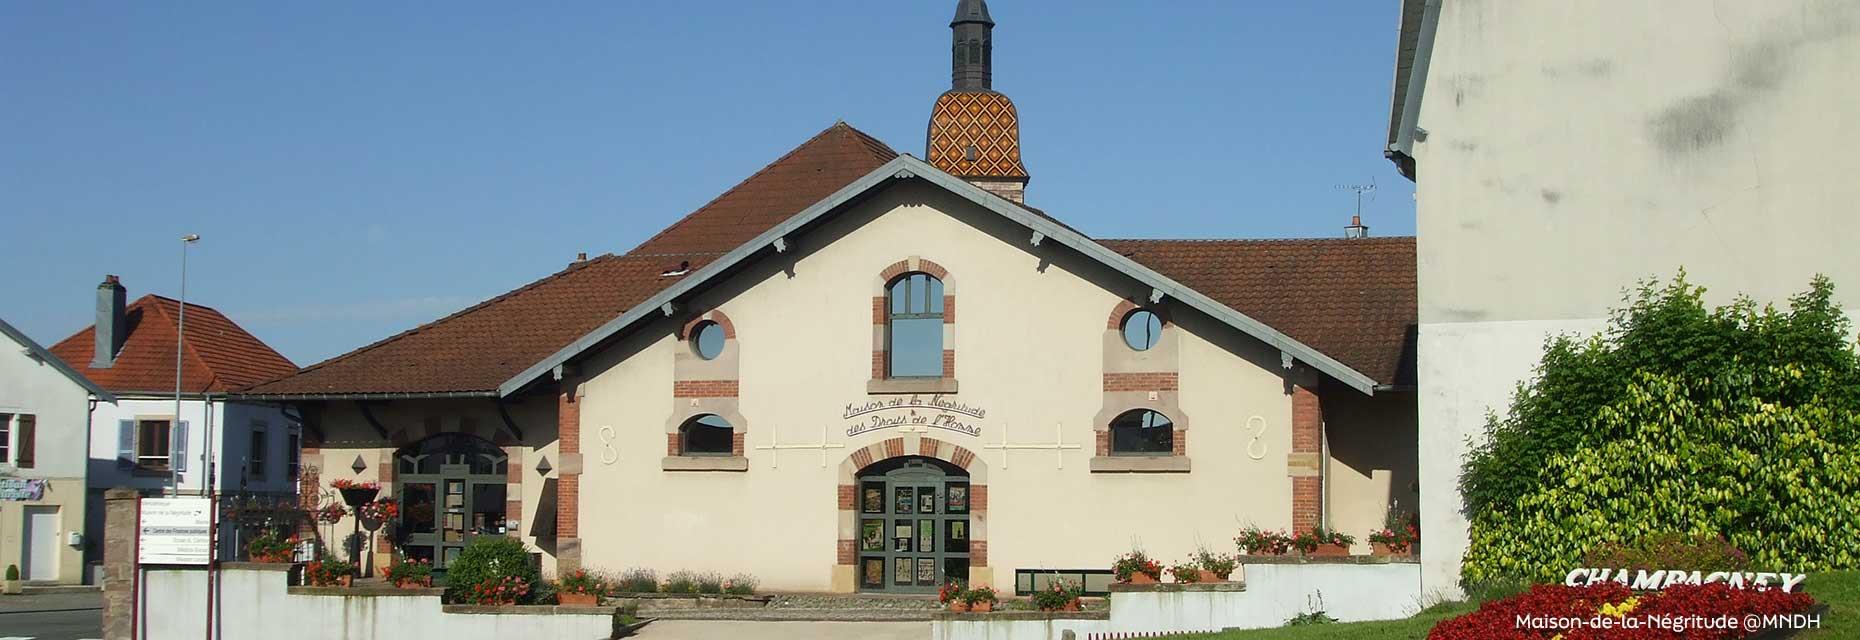 Visit of the House of Negritude and Human Rights in Champagney in Haute-Saône